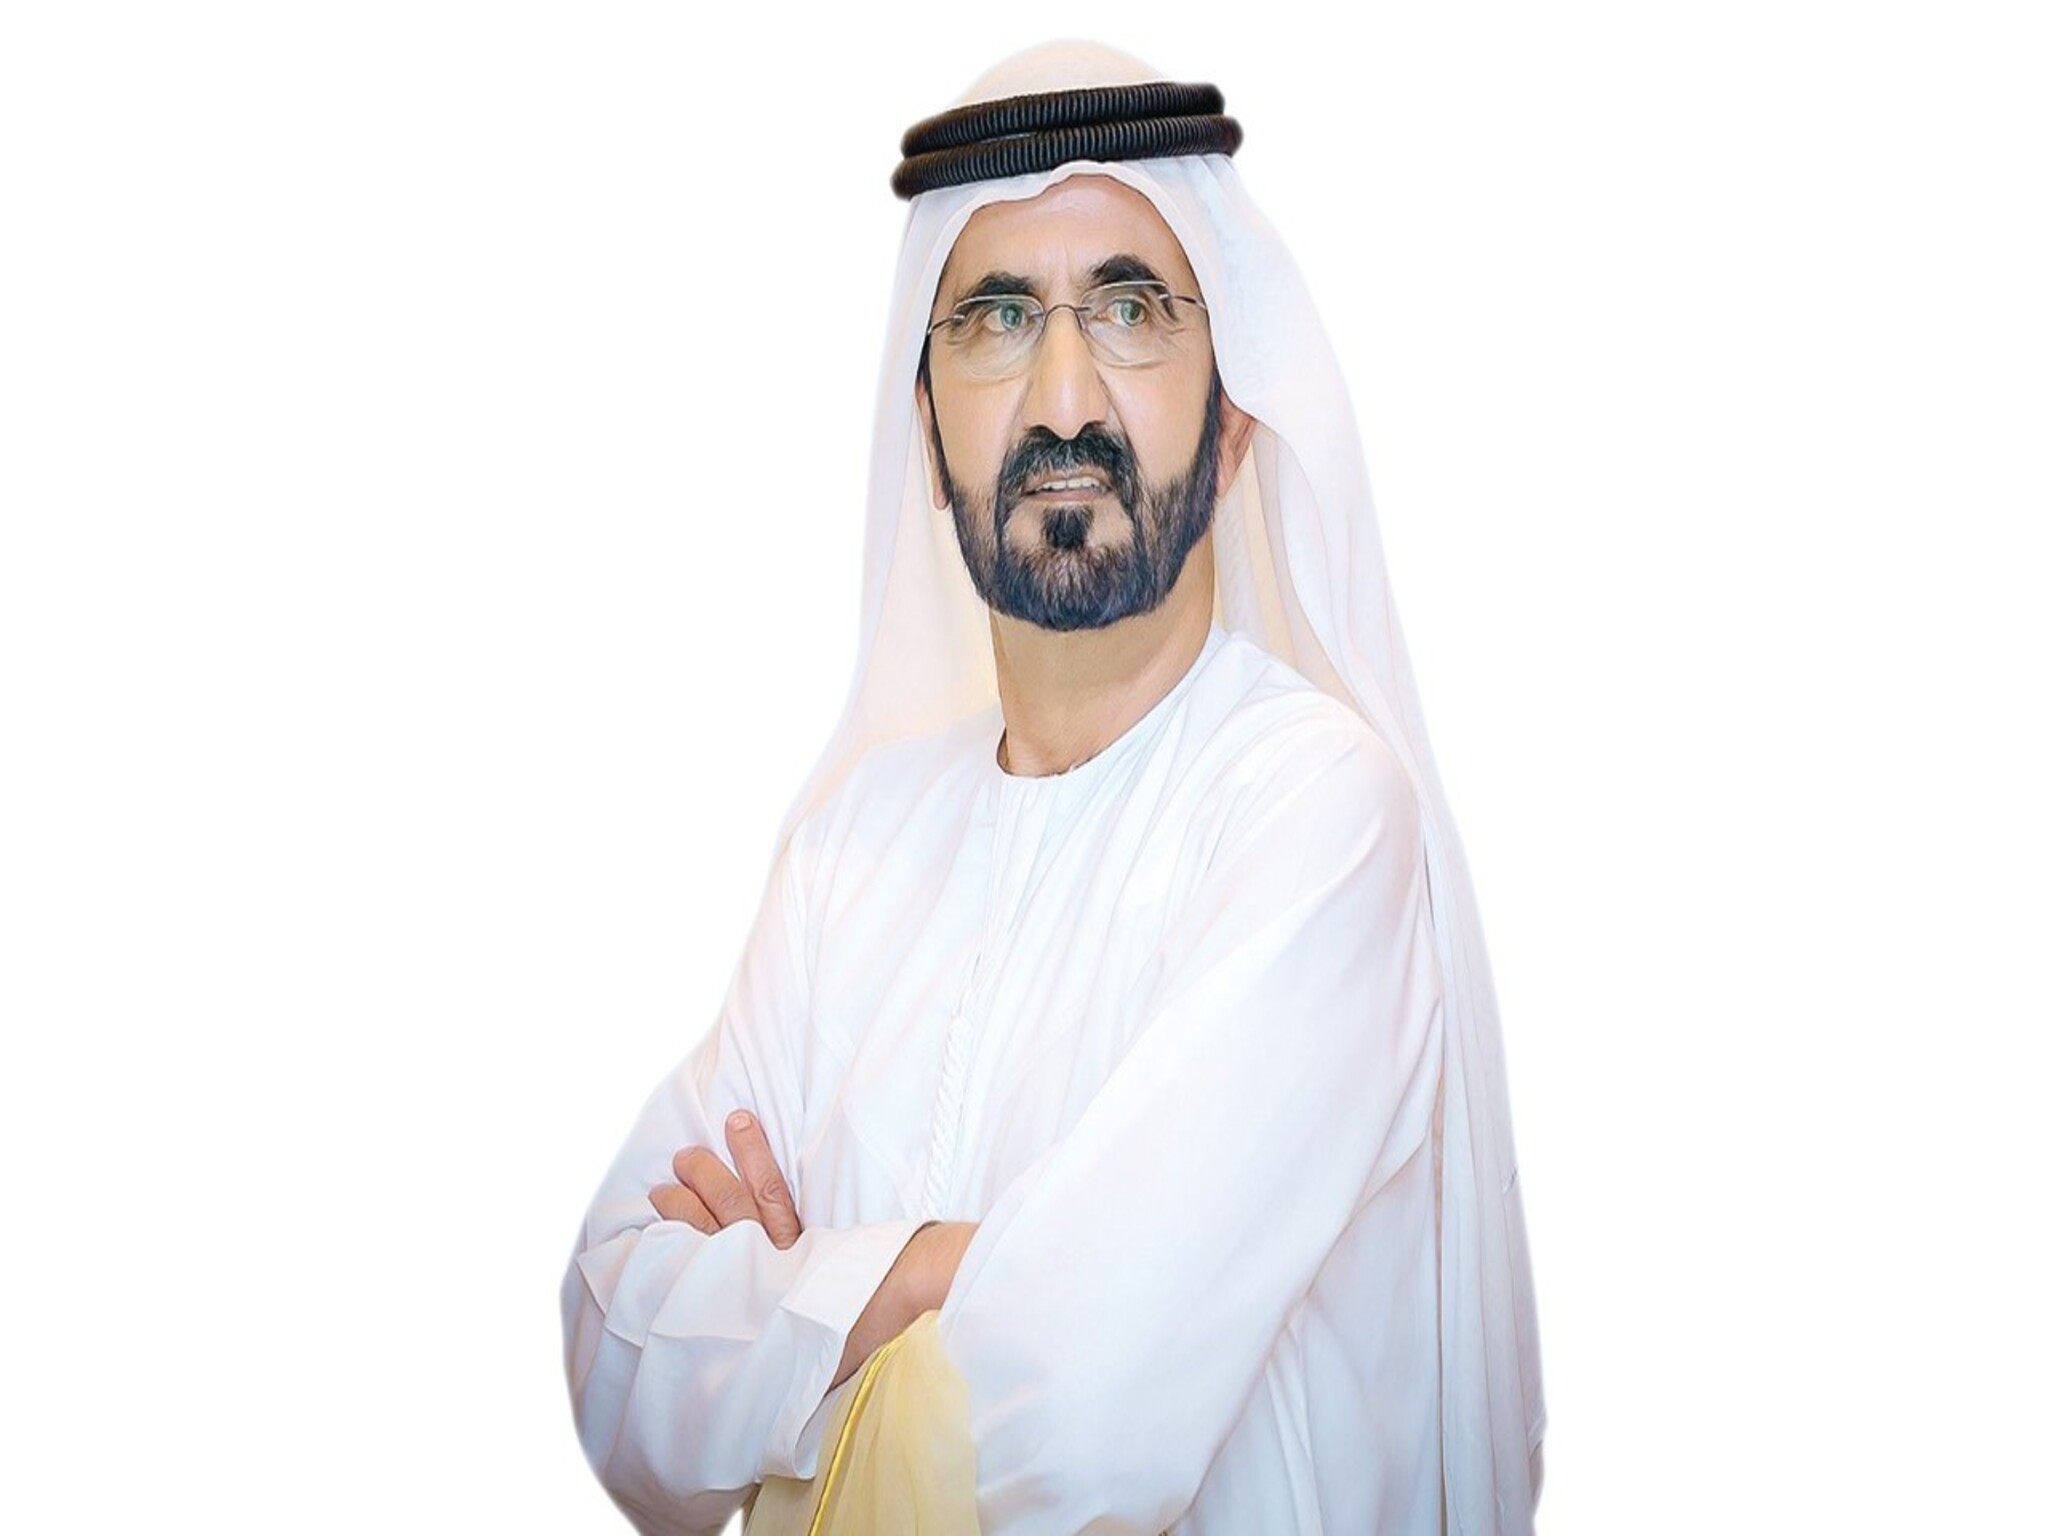 The UAE announces the date of implementing the unified visa system